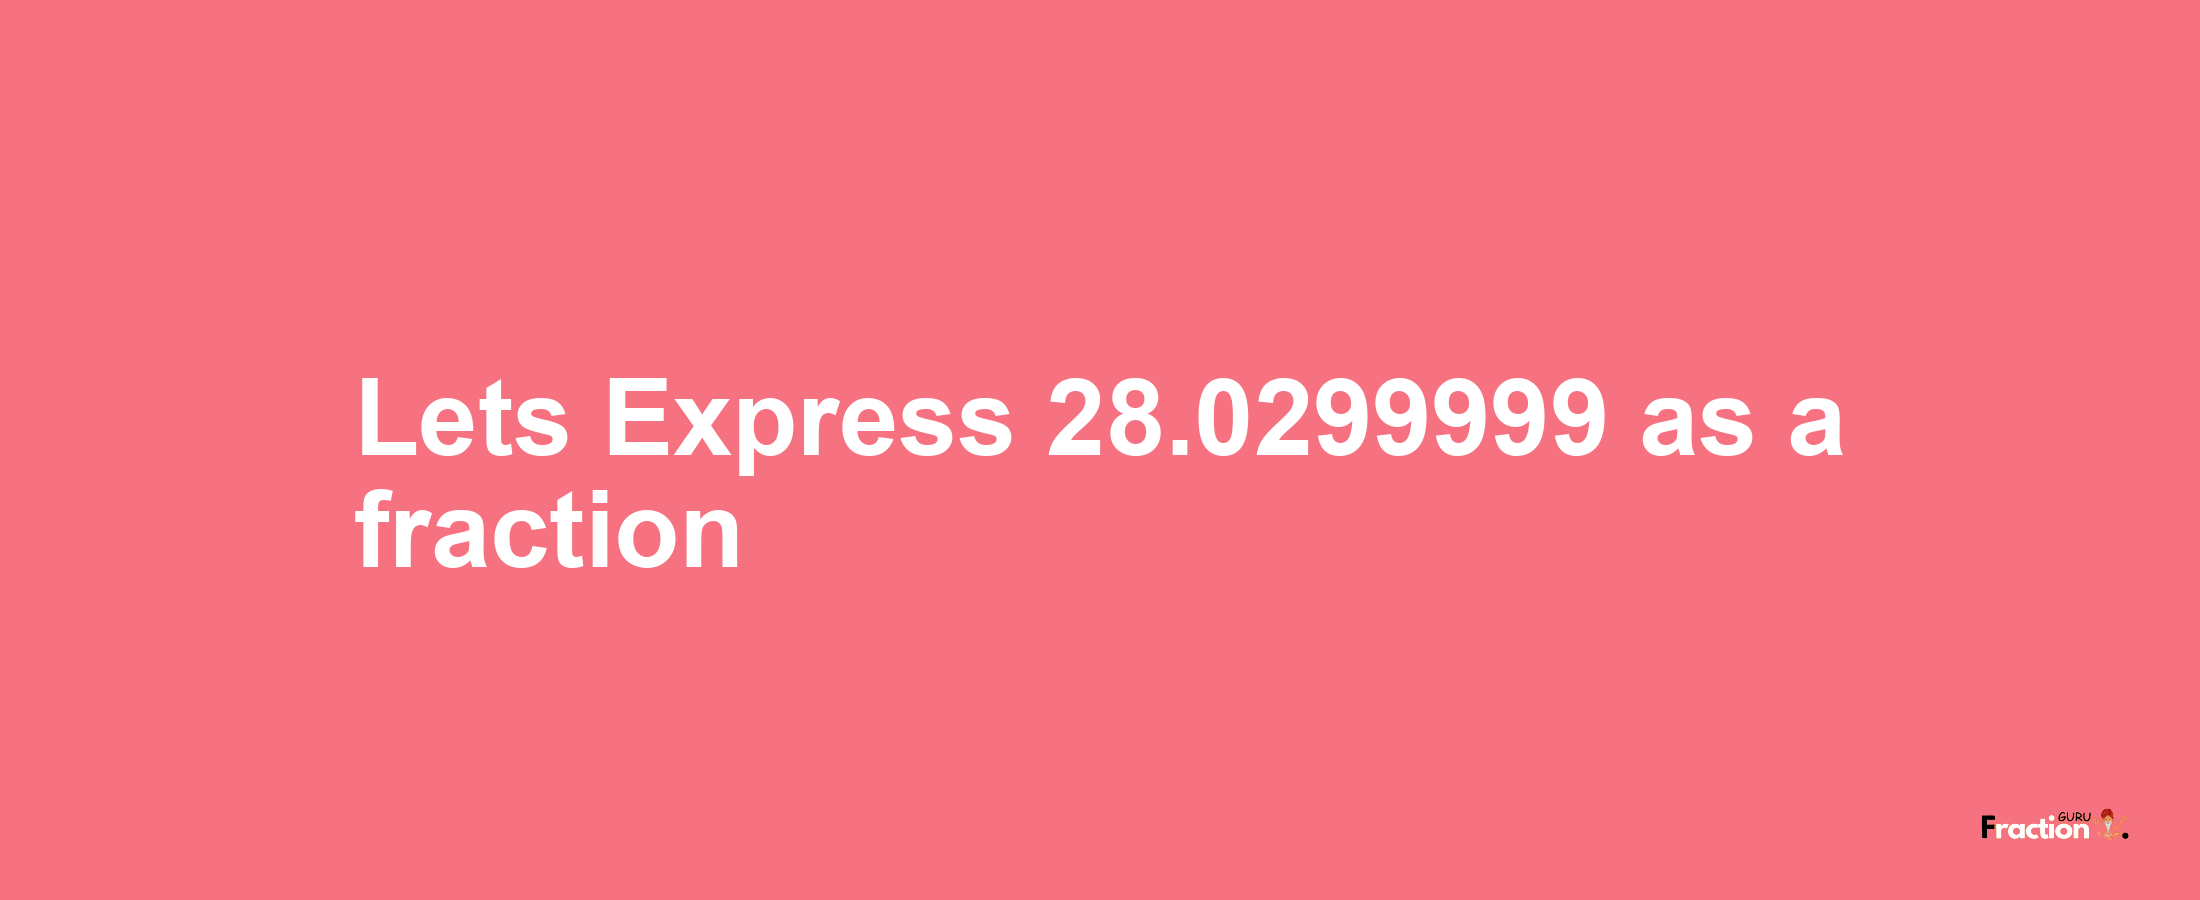 Lets Express 28.0299999 as afraction